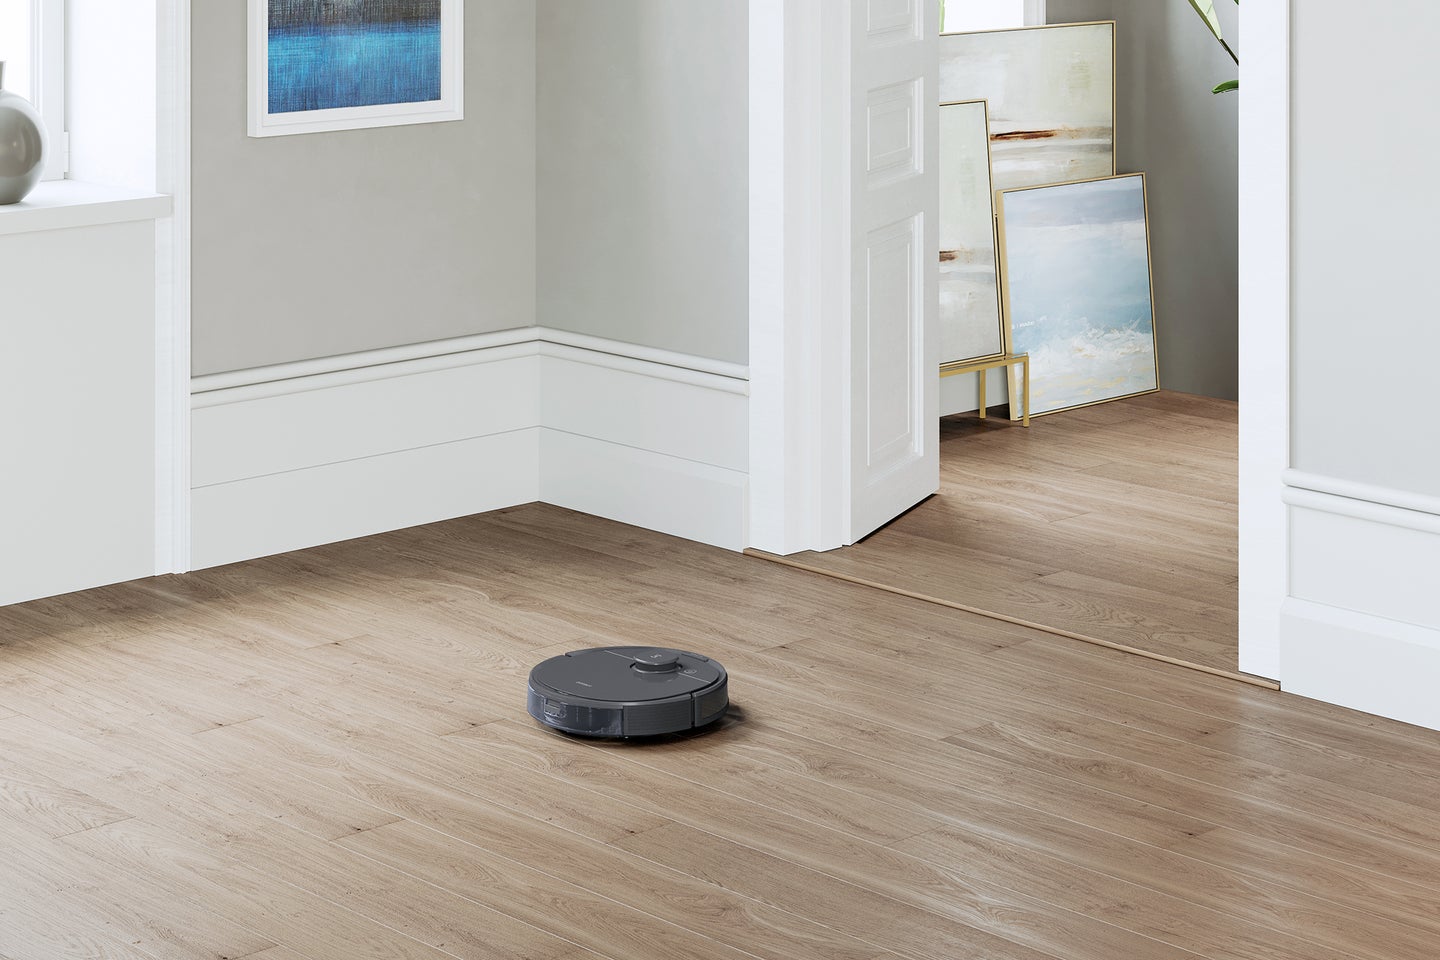 T8 Osmo vacuum and mopping robot on a wooden floor